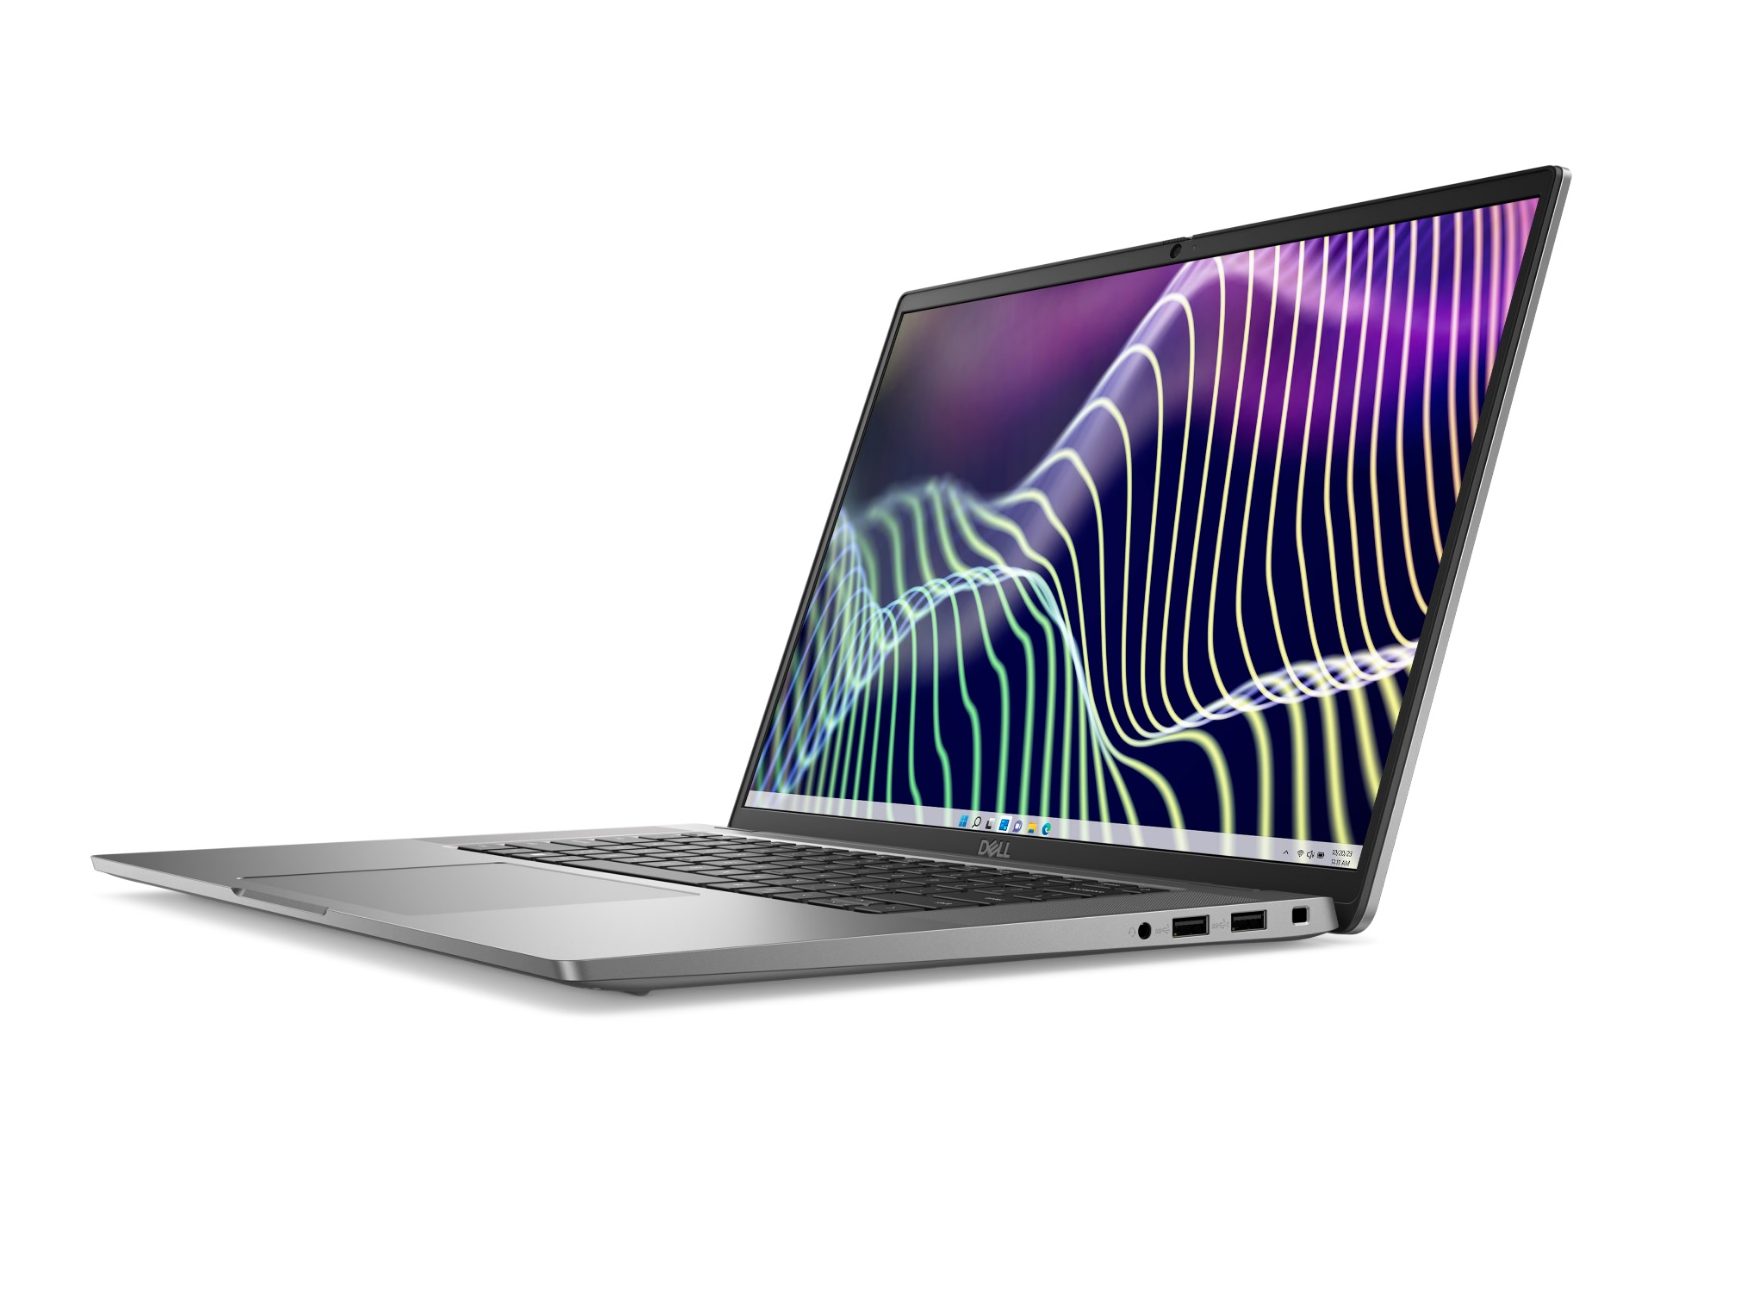 A pronounced side-view of the Dell Latitude 7640 laptop.